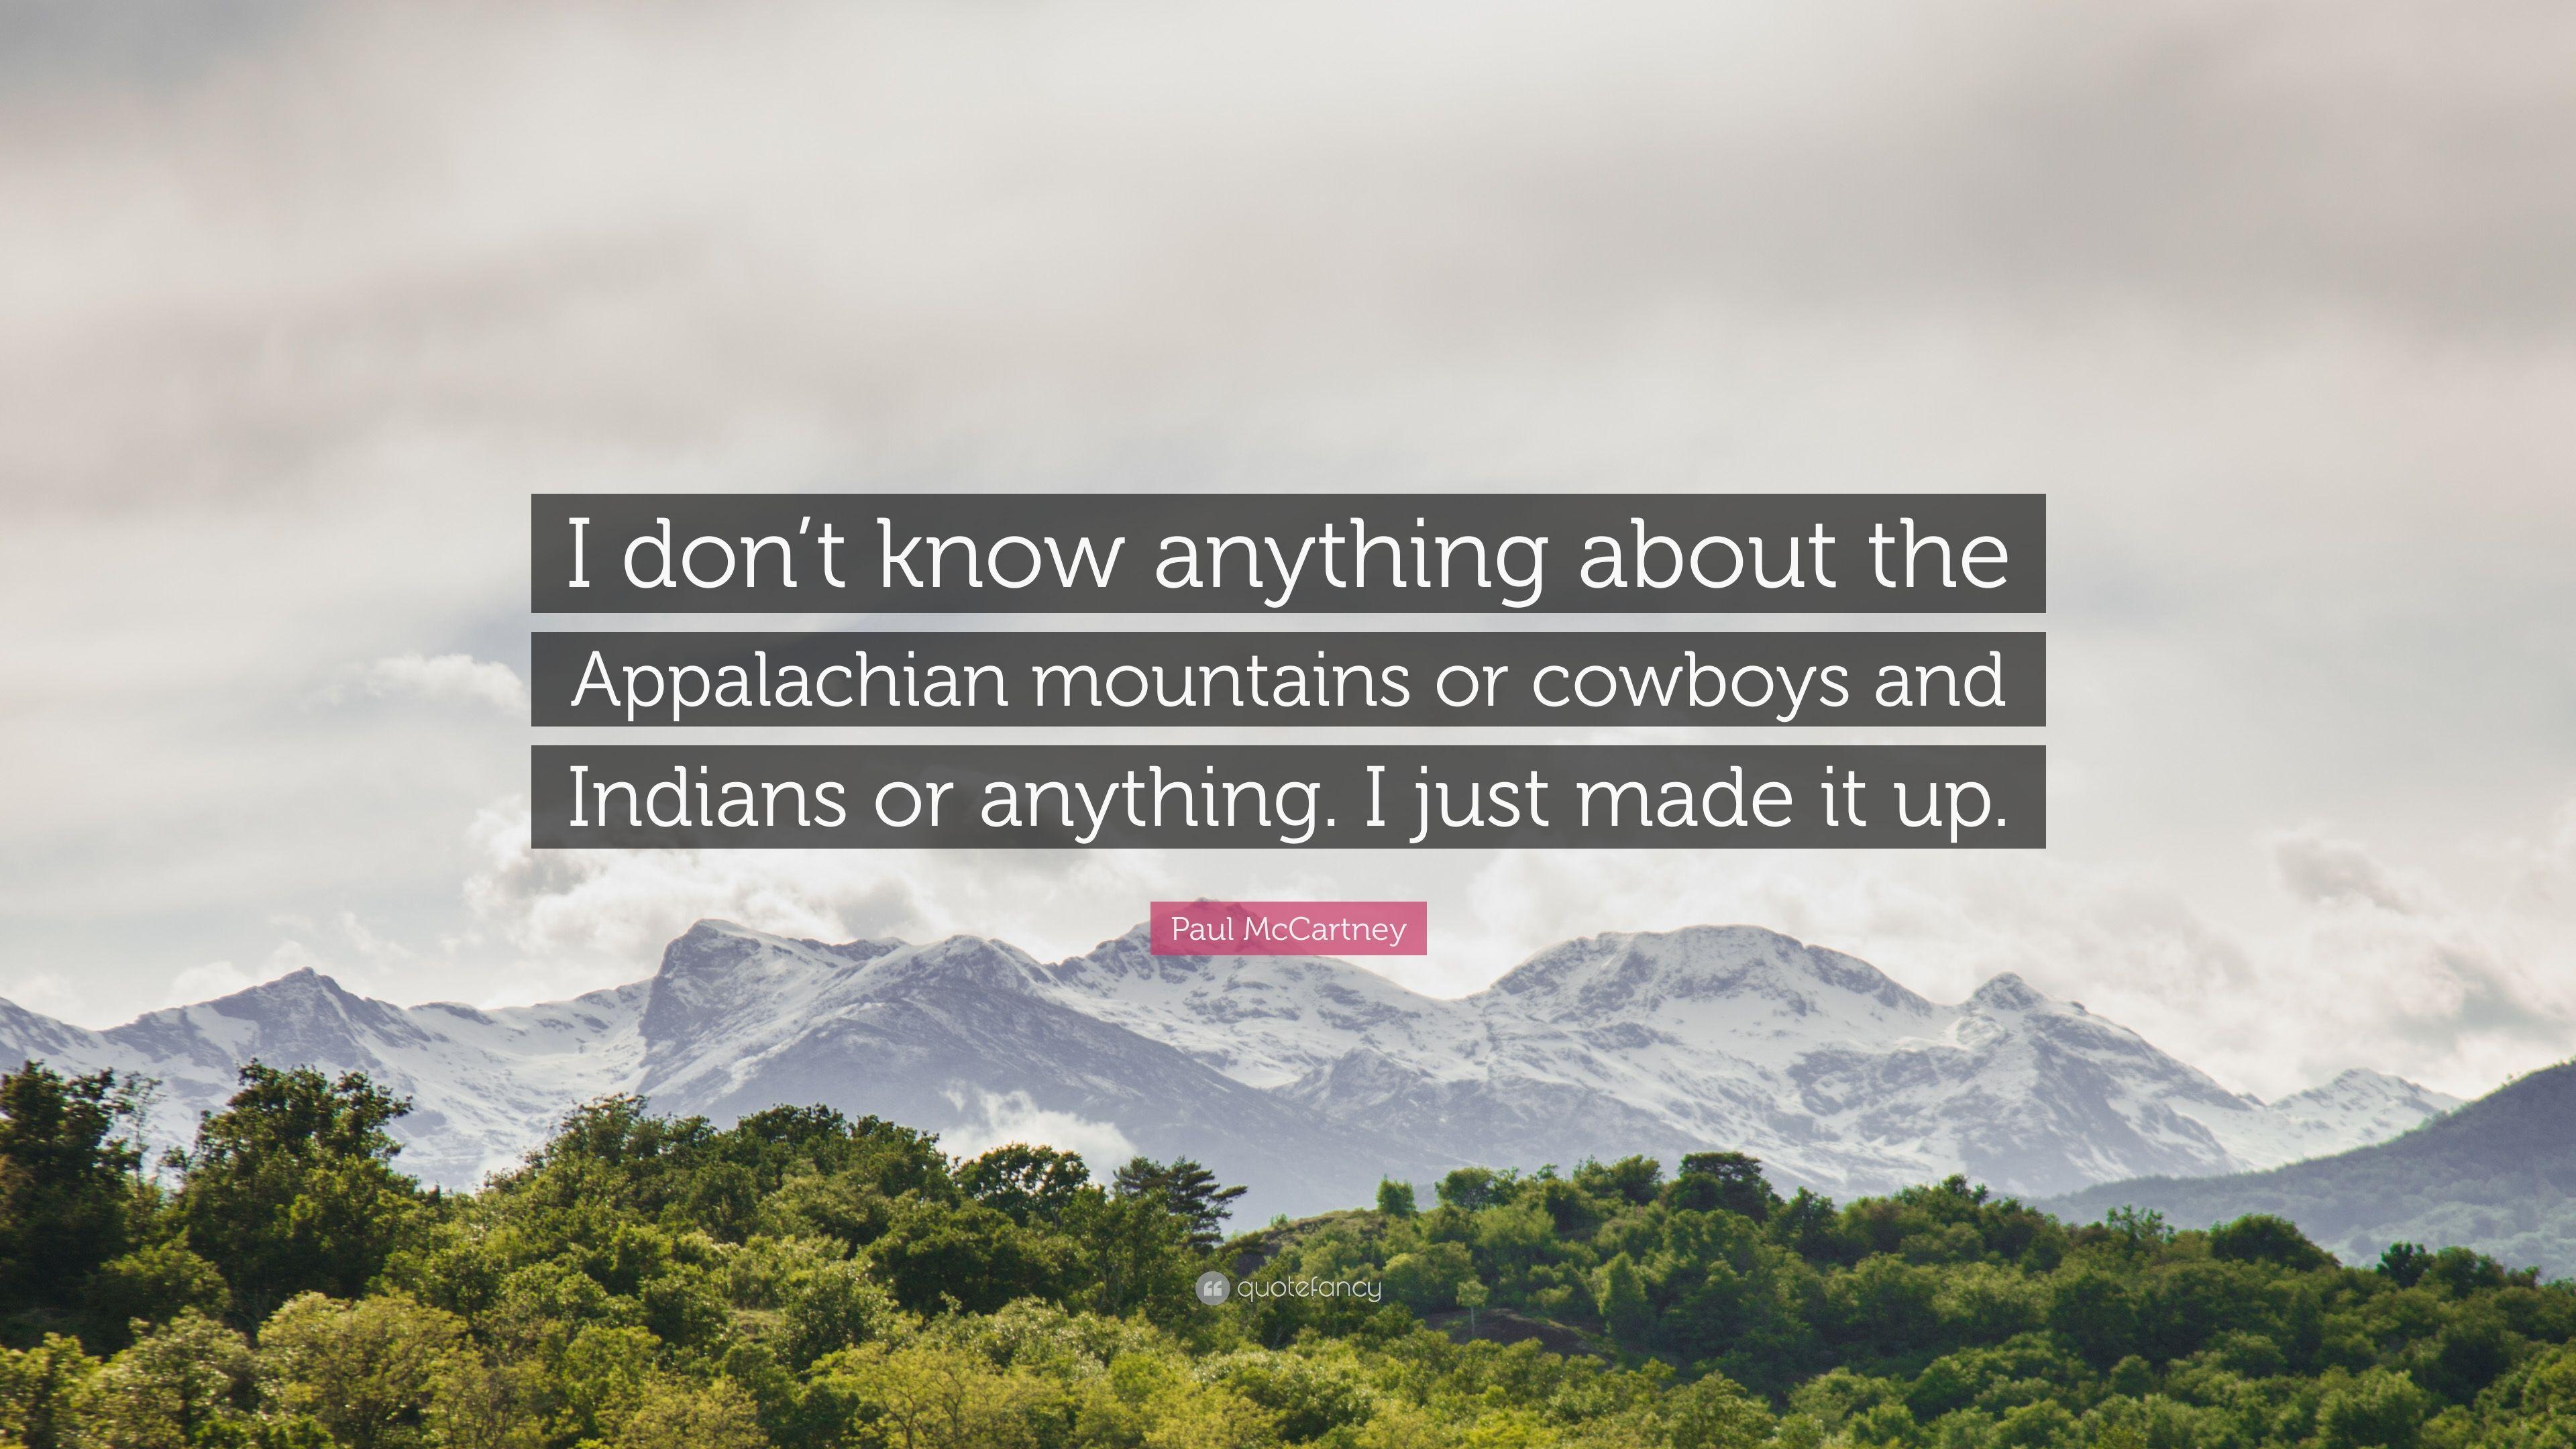 Paul McCartney Quote: “I don't know anything about the Appalachian